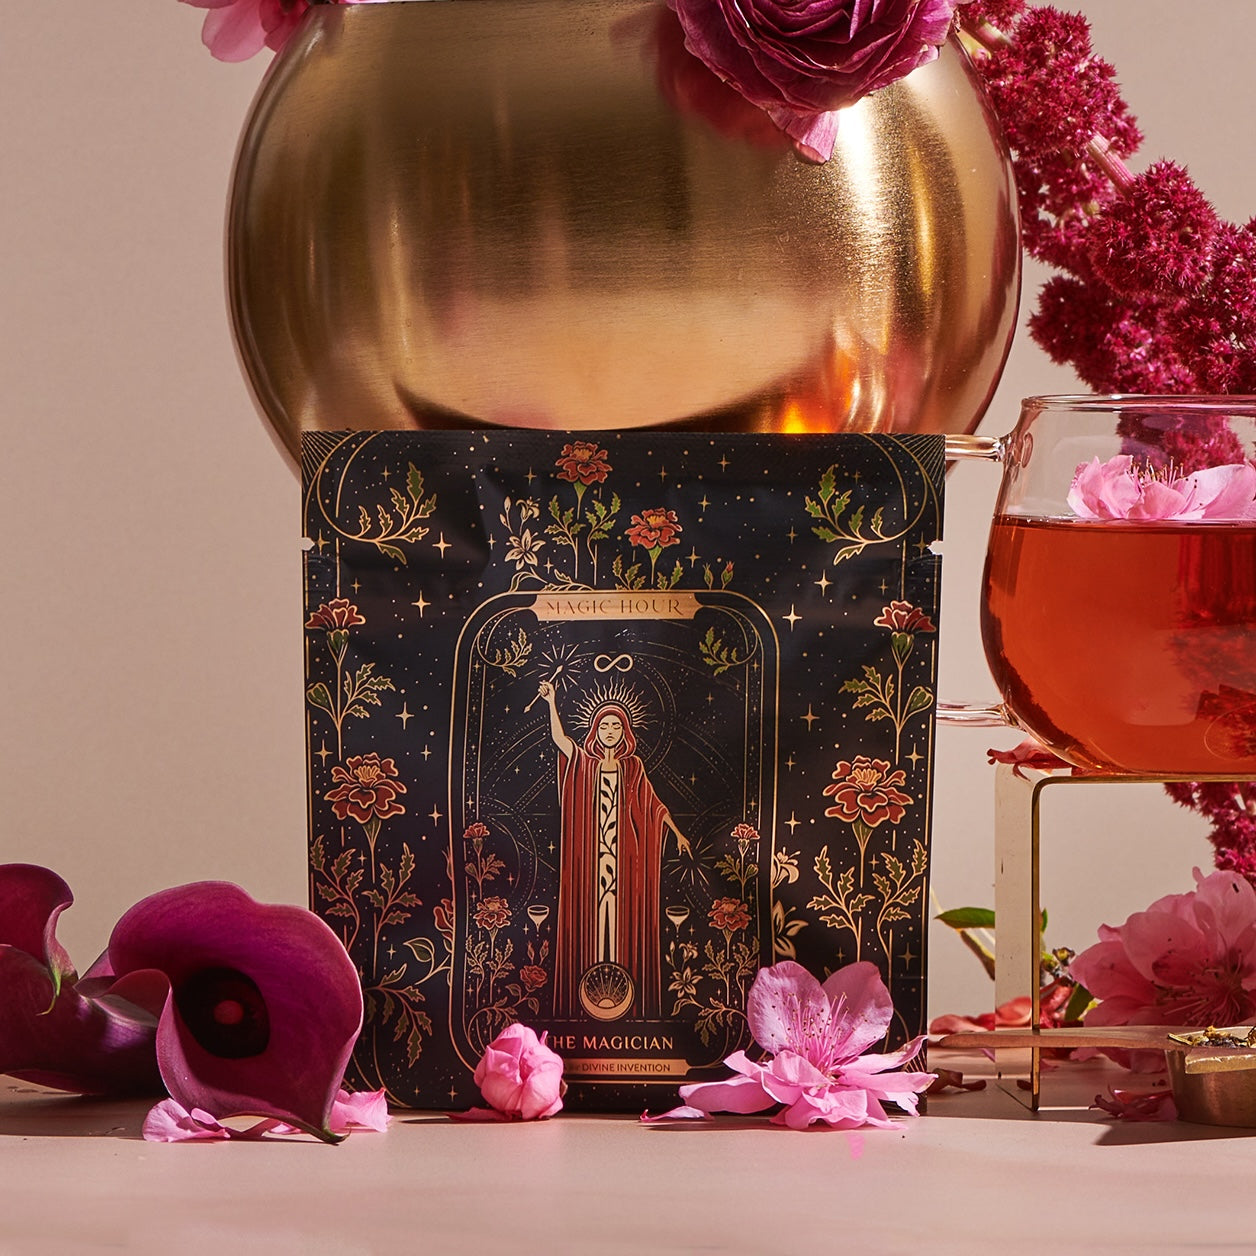 A colorful tarot card, "The Magician" from Magic Hour, showcasing transformative abilities, is displayed partially inside a golden vase adorned with pink roses. There is a glass of pink liquid with flower petals nearby, surrounded by various vibrant flowers on a soft pink background.